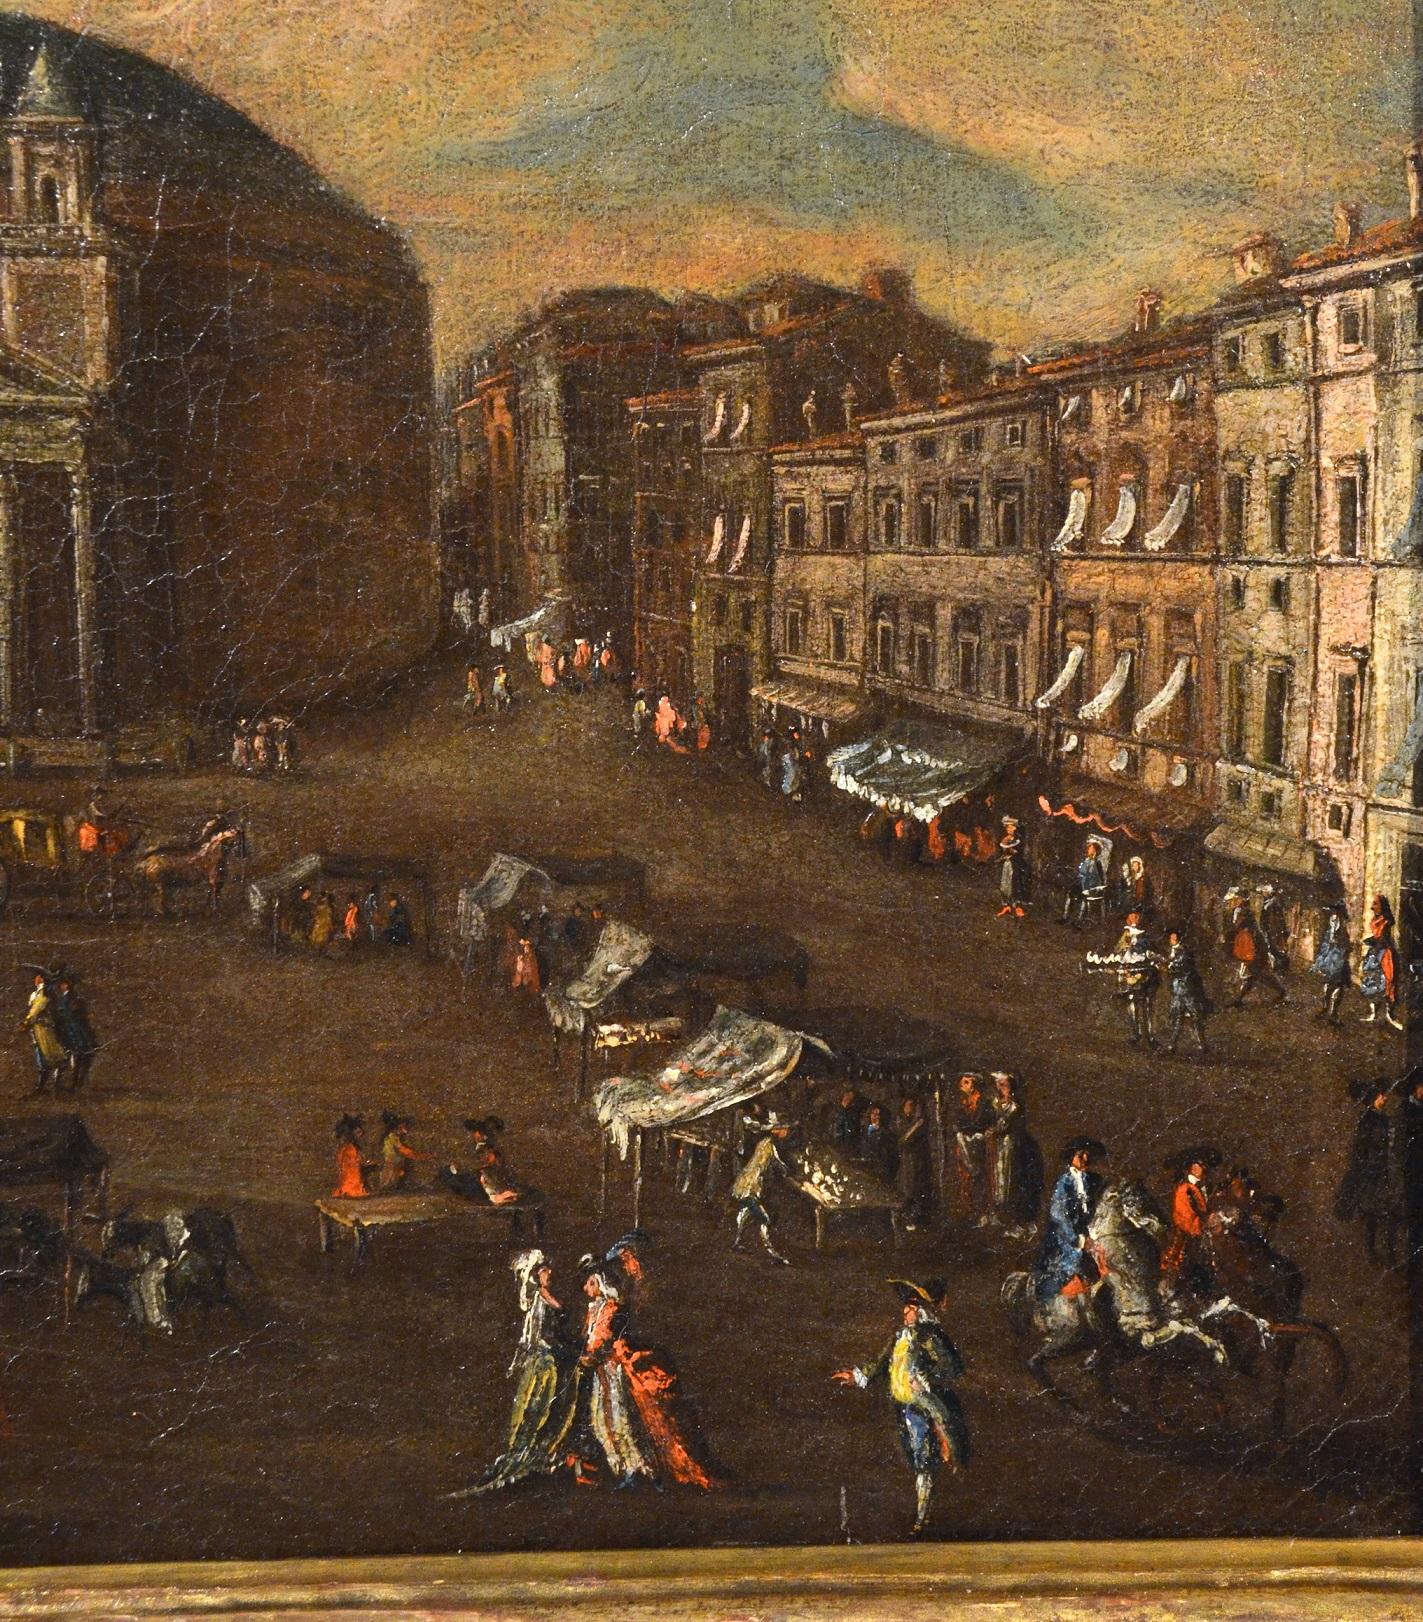 Vetturali Landscape Rome Pantheon Paint OIl on canvas Old master 18th Century - Old Masters Painting by Gaetano Vetturali 